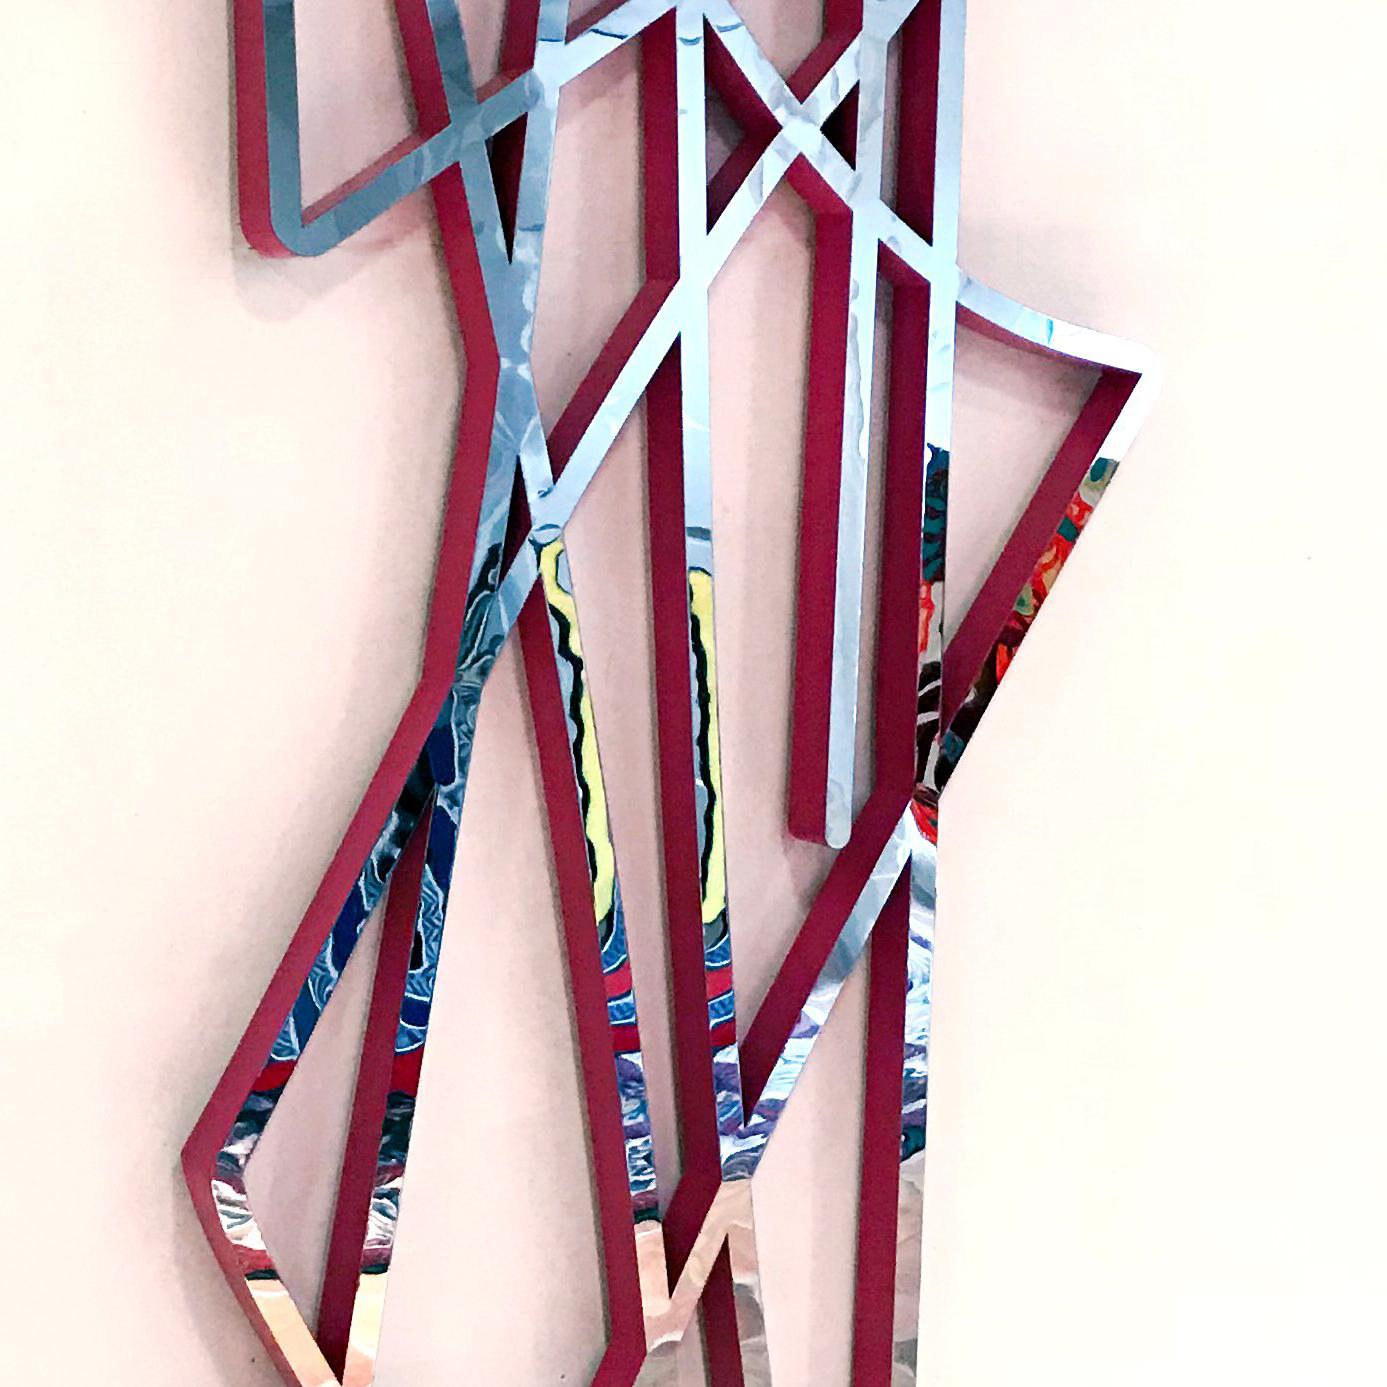 Jenna's piece is a stainless steel sculpture, with enamel painted sides. 

Jenna’s abstract style and emphasis on color and  movement through linework seeks to allow each pieces’ audience a unique reconstruction of context in which each work is